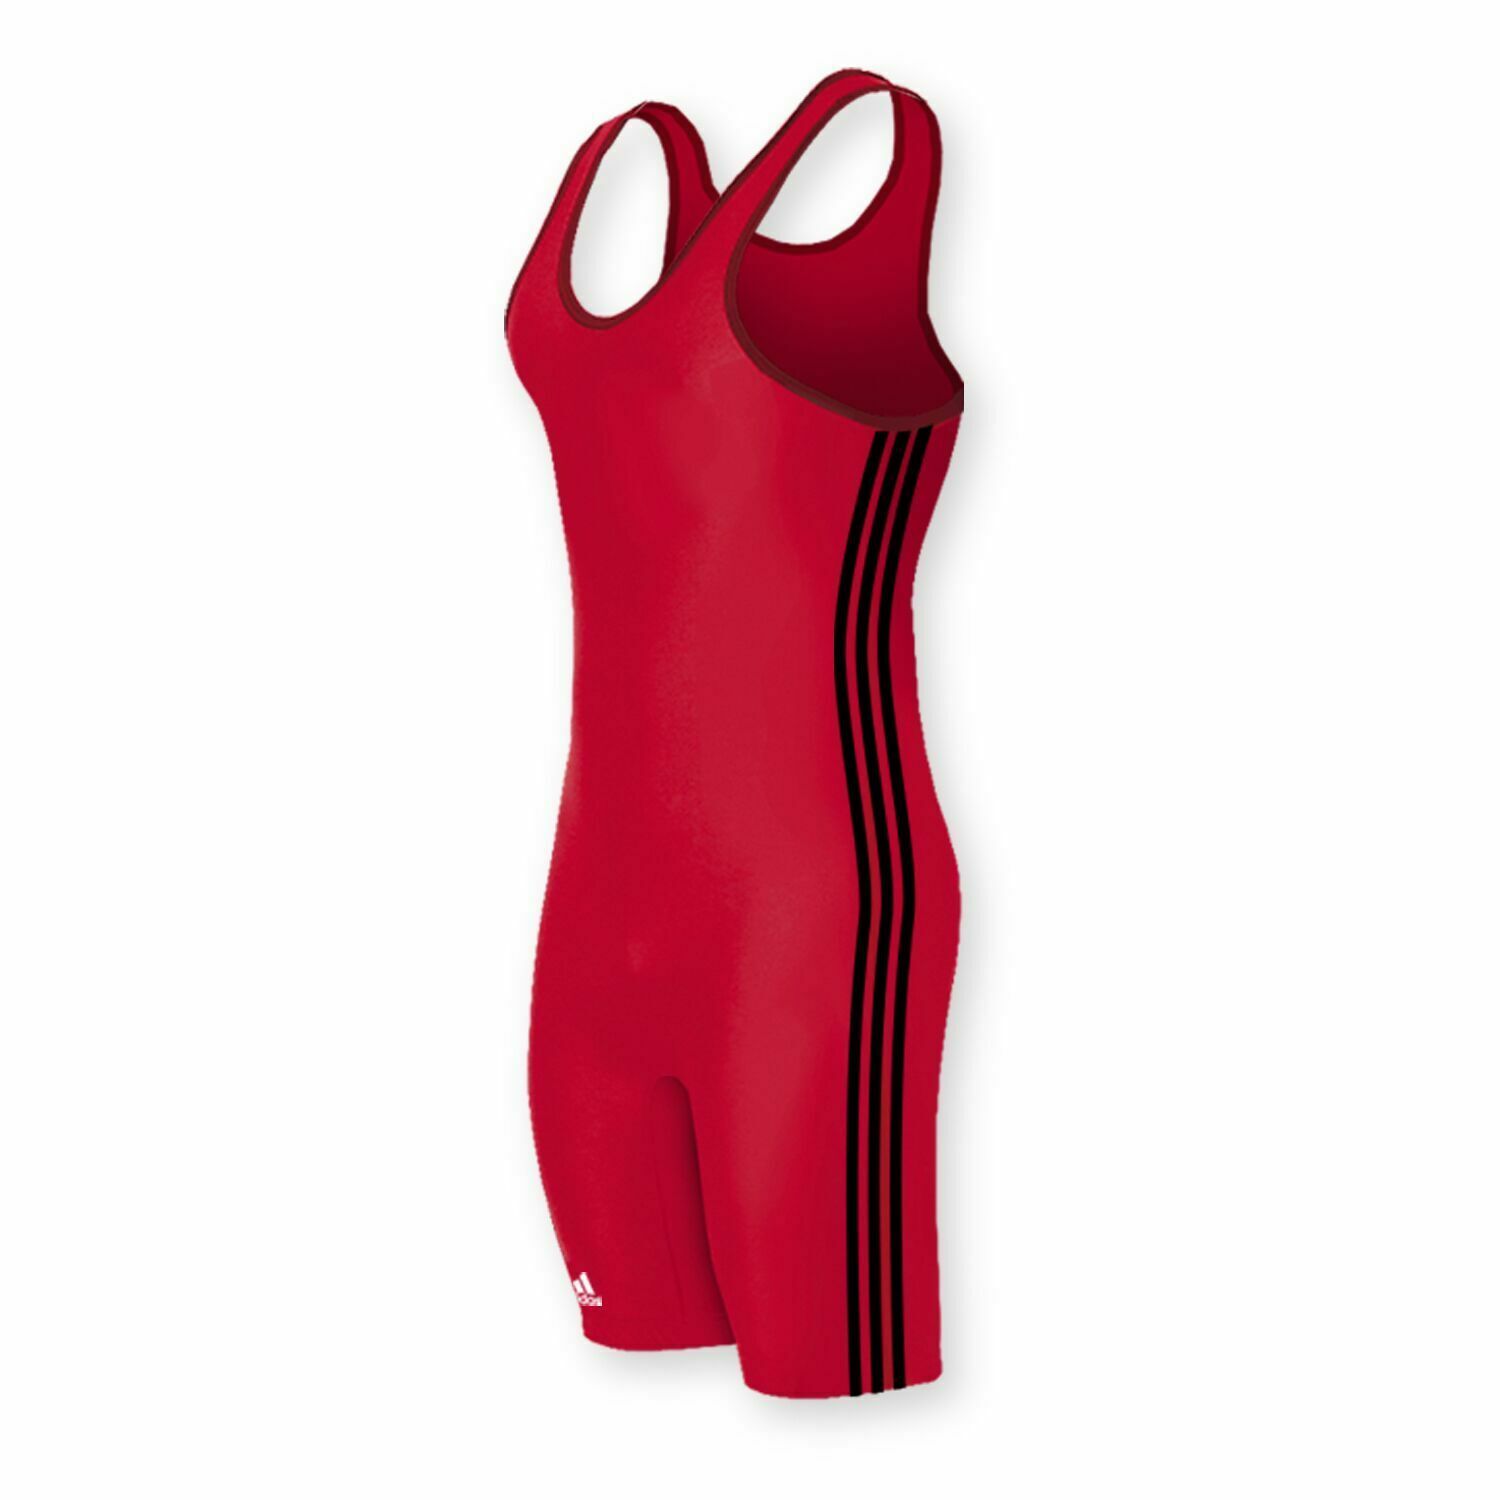 Adidas | aS102s | 3-Stripe Mens Wrestling and 14 similar items